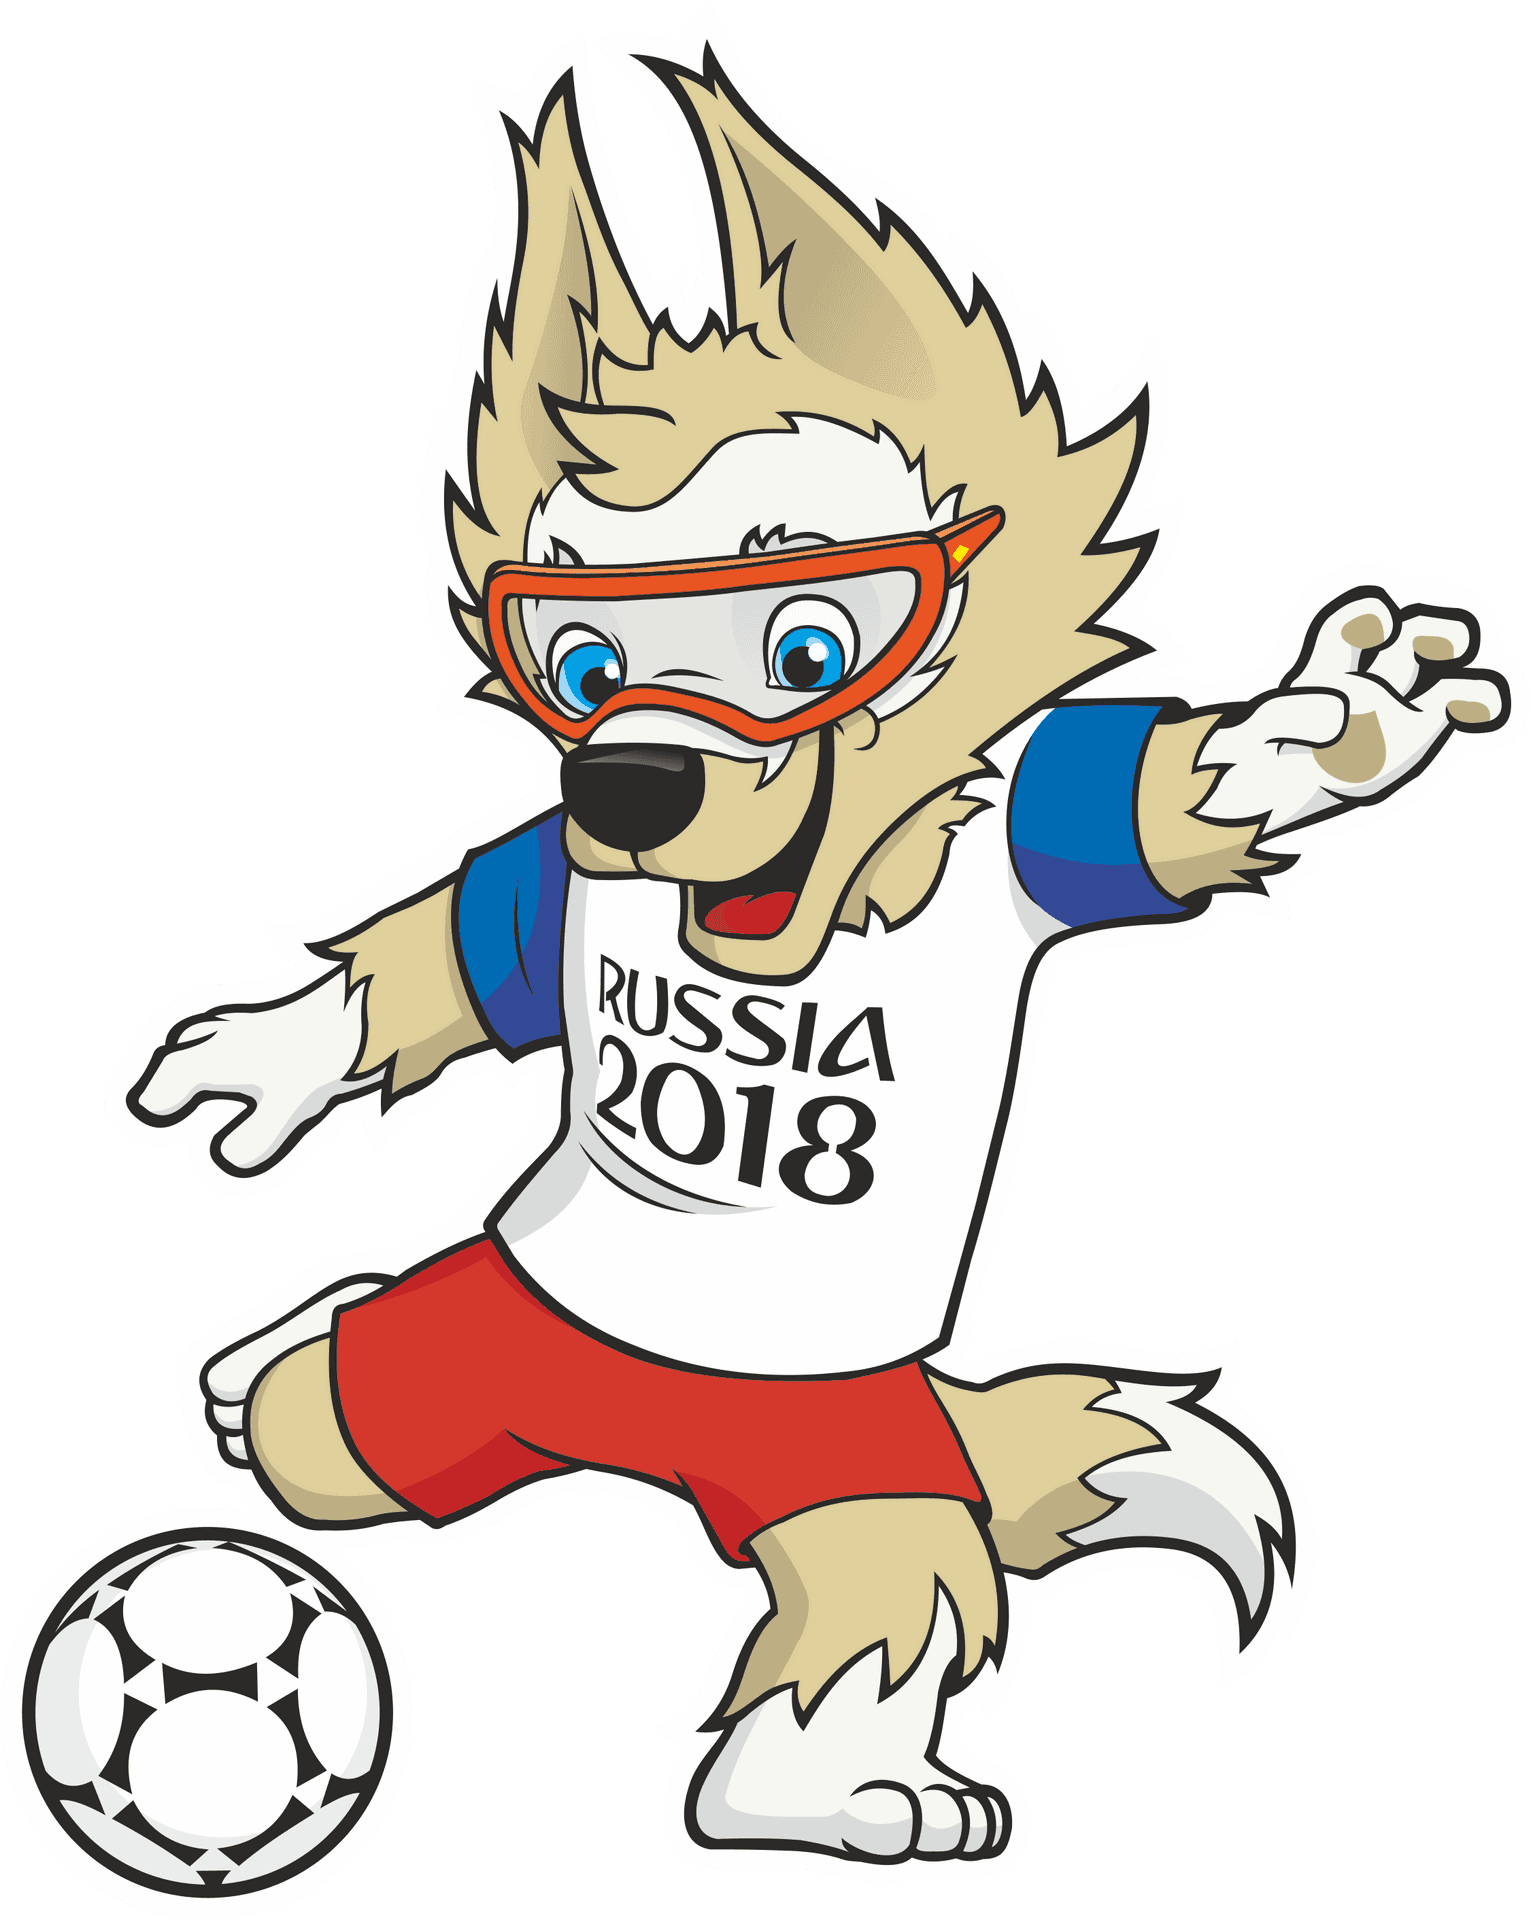 Russia2018 World Cup Mascot PNG